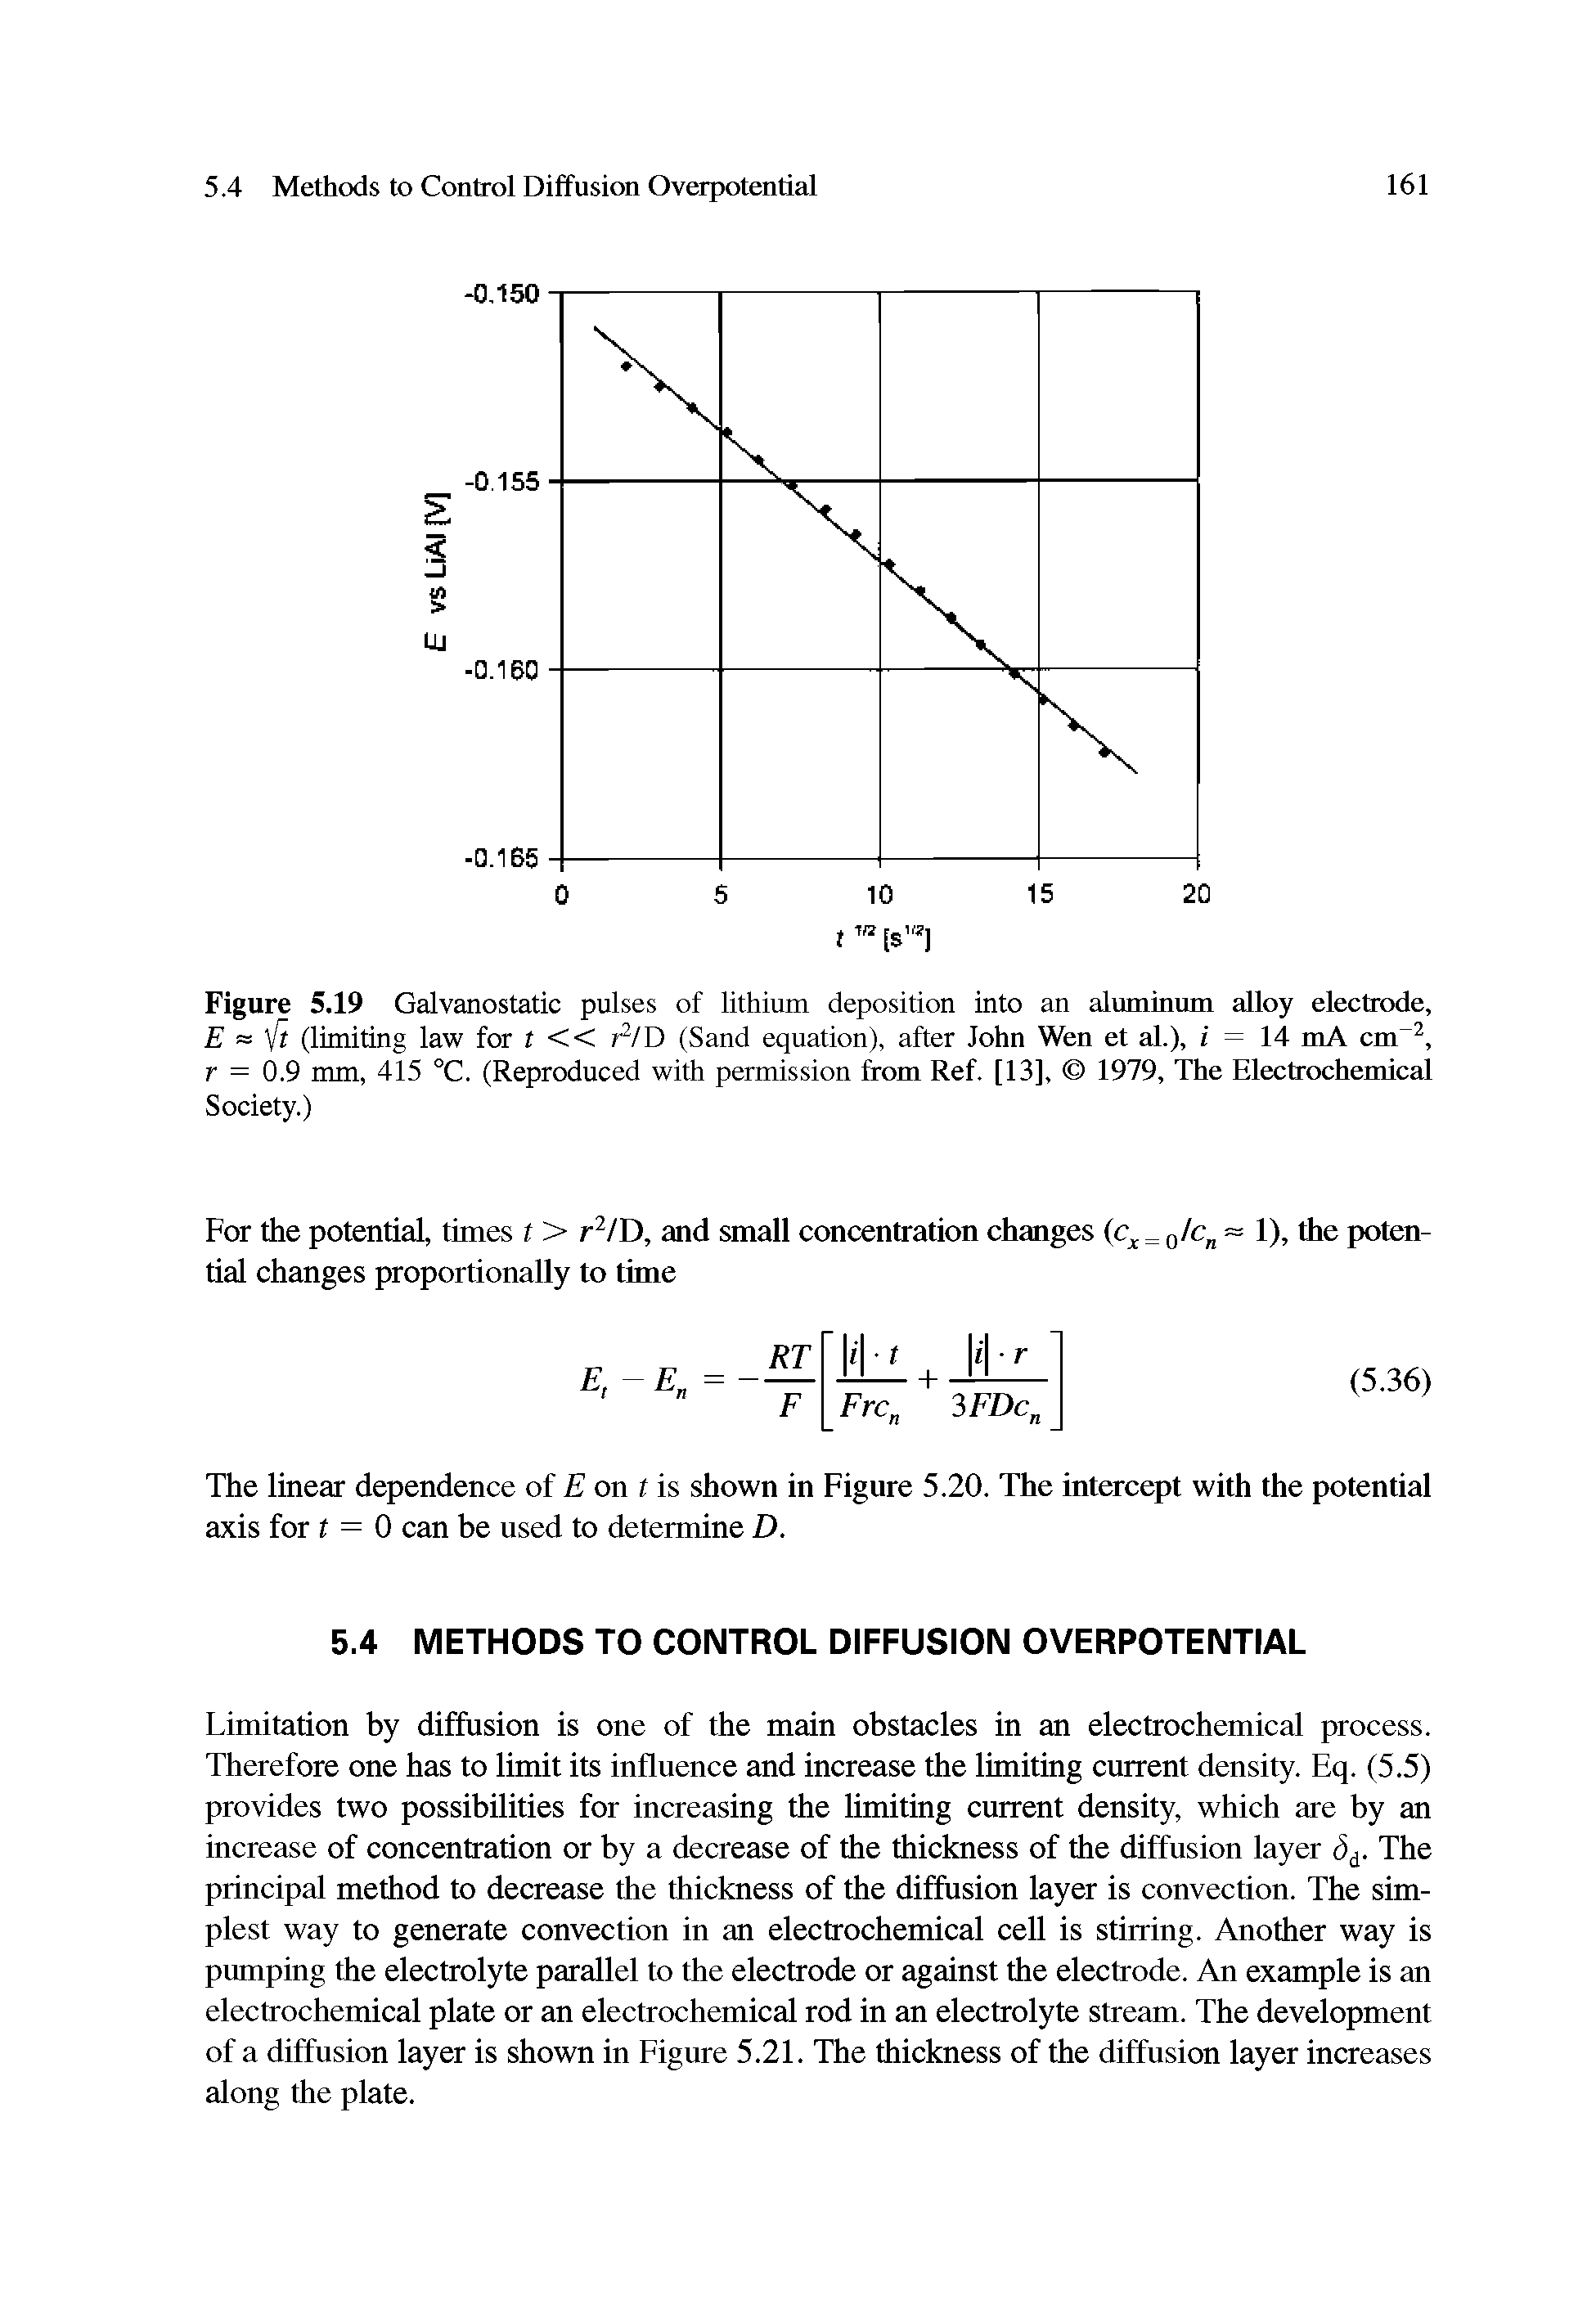 Figure 5.19 Galvanostatic pulses of lithium deposition into an aluminum alloy electrode, E it (limiting law for r << r /D (Sand equation), after John Wen et al.), i = 14 mA cm , r = 0.9 mm, 415 °C. (Reproduced with permission from Ref. [13], 1979, The Electrochemical Society.)...